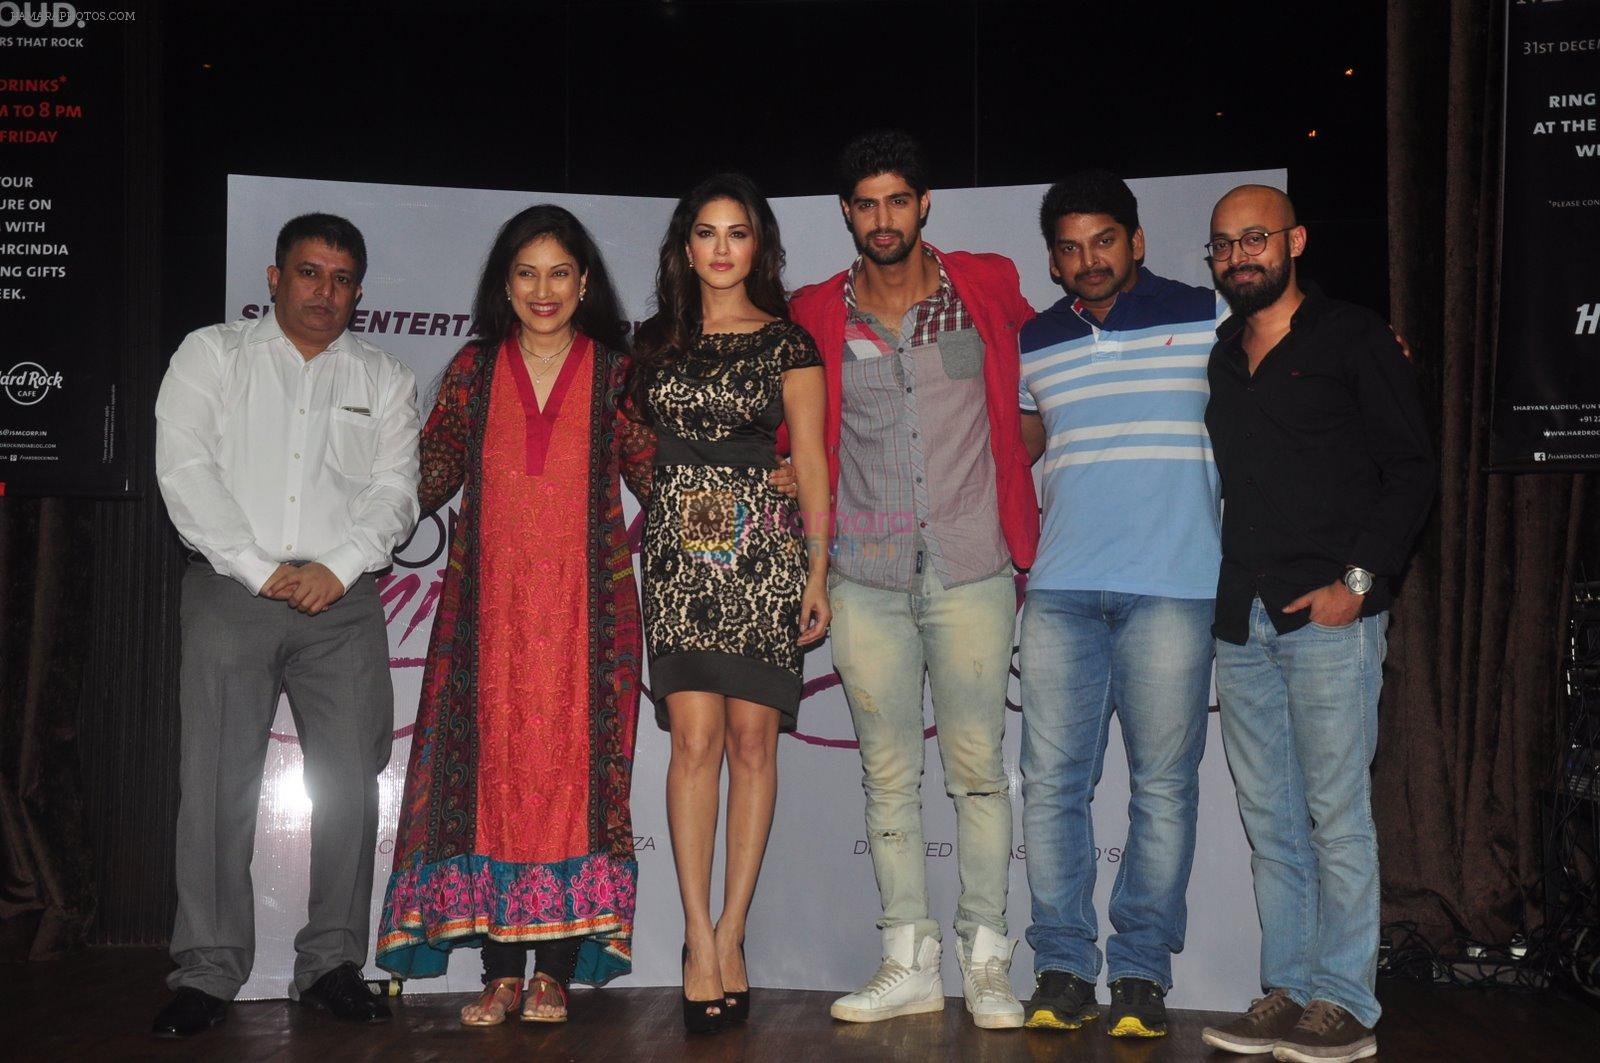 Sunny leone, Tanuj Virwani at One Night stand promotions in Mumbai on 24th Dec 2014